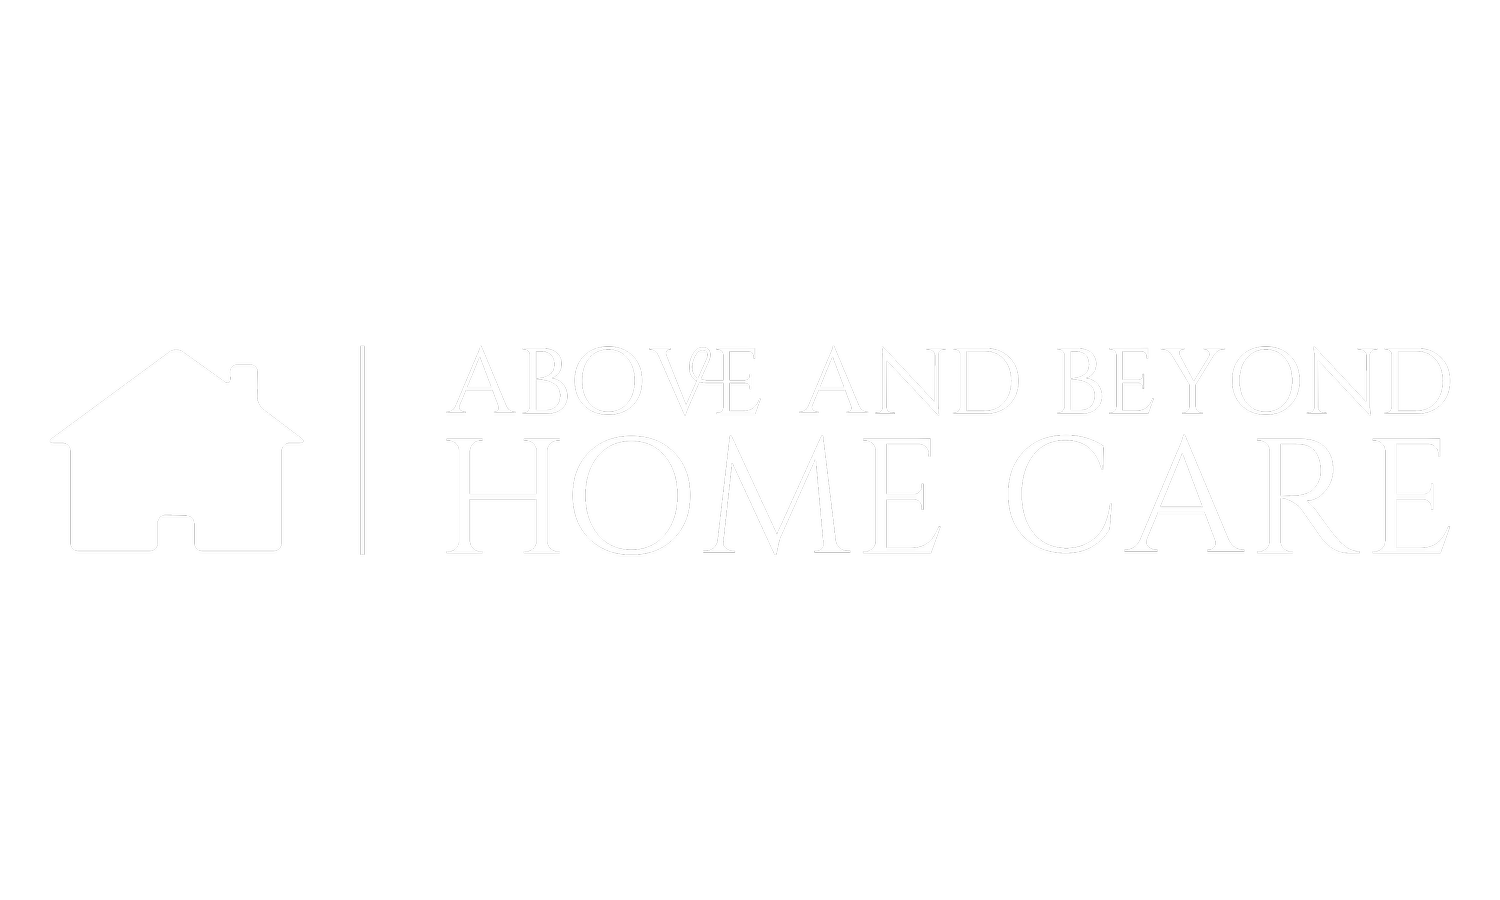 Above and Beyond Home Care